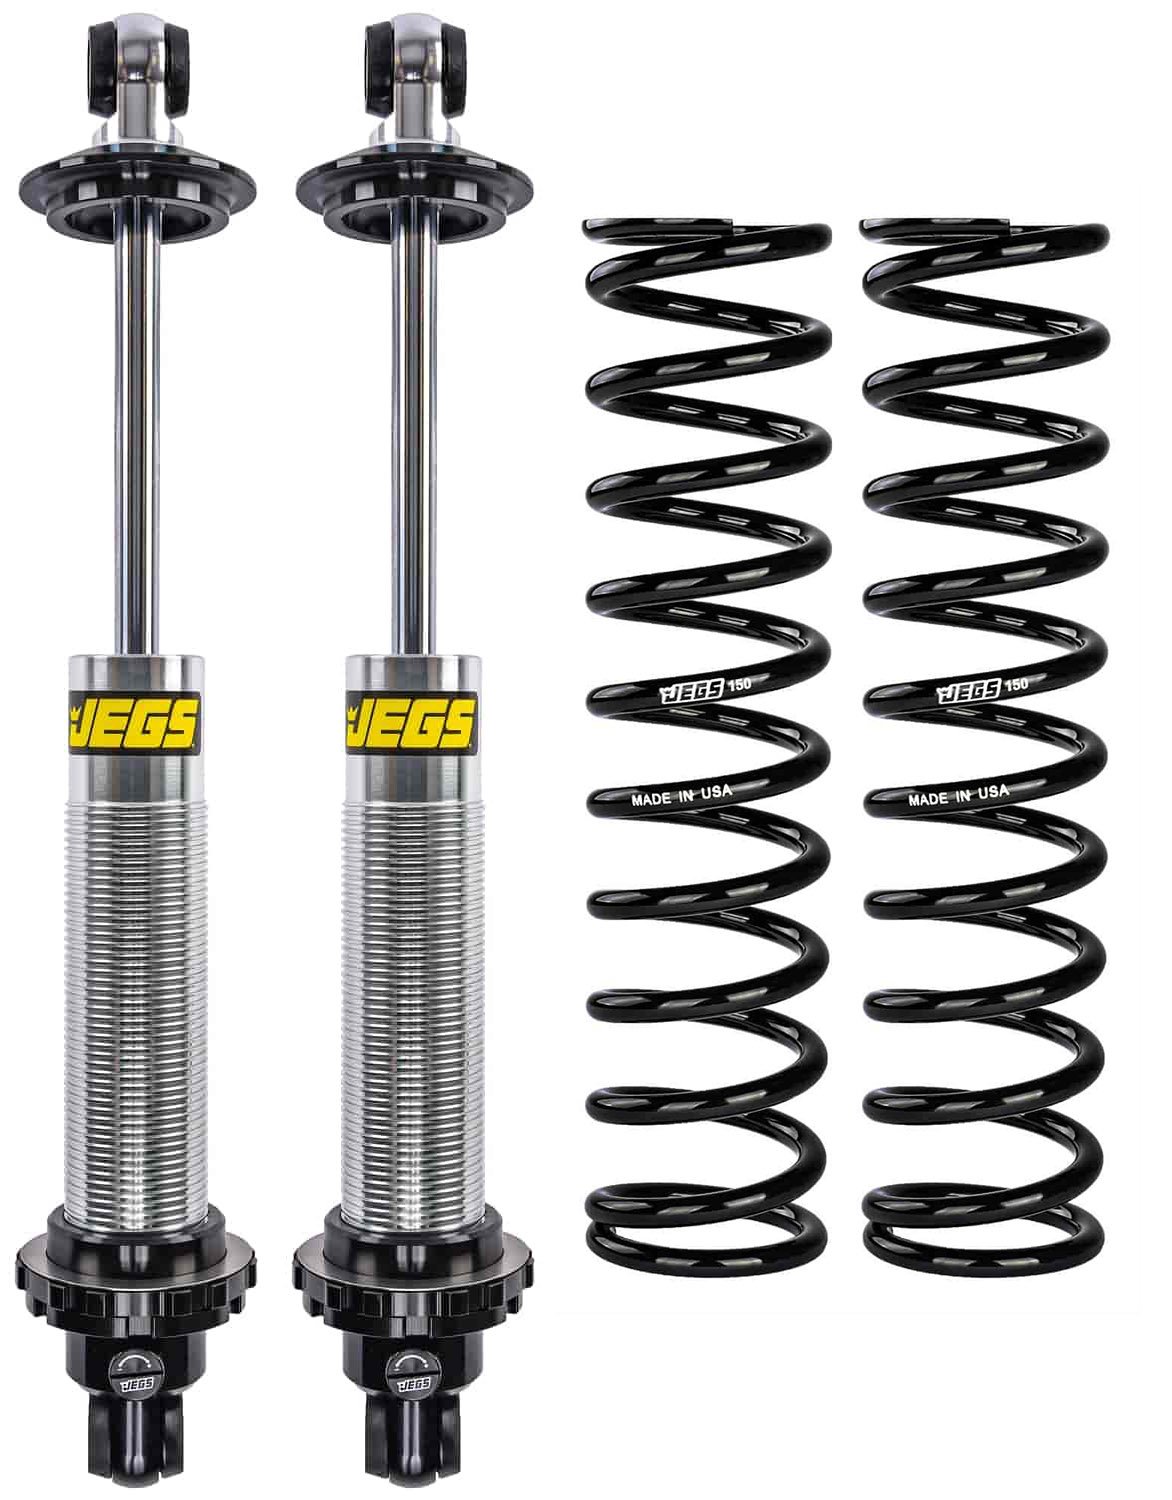 Single Adjustable Coil-Over Shocks and Coil-Over Springs Kit [14 in., 150 lbs./in. Springs]